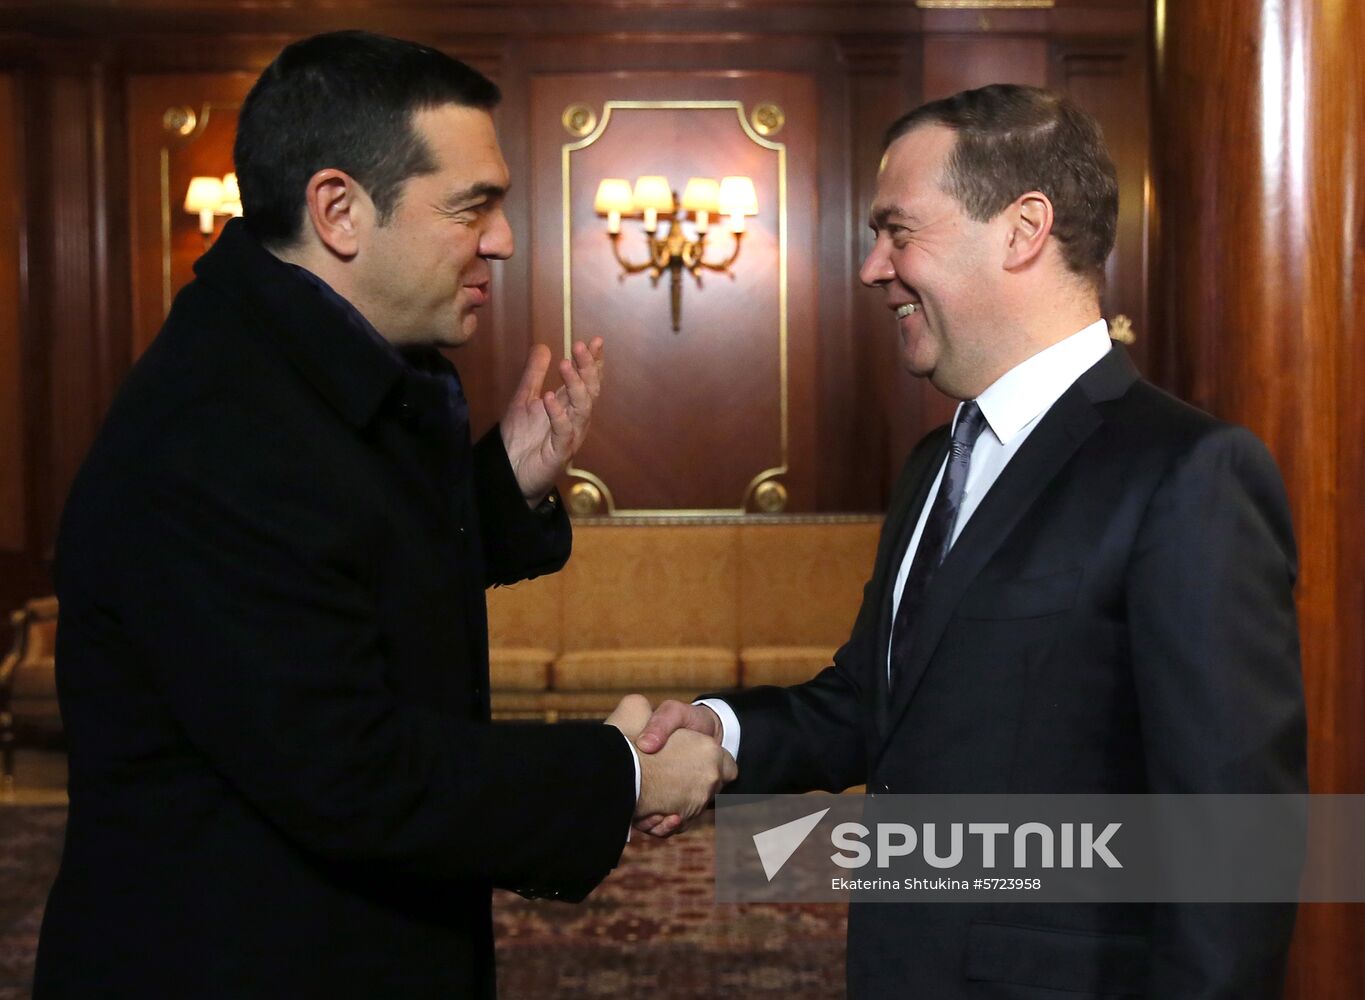 Prime Minister Dmitry Medvedev meets with Prime Minister of Grees Alexis Tsipras